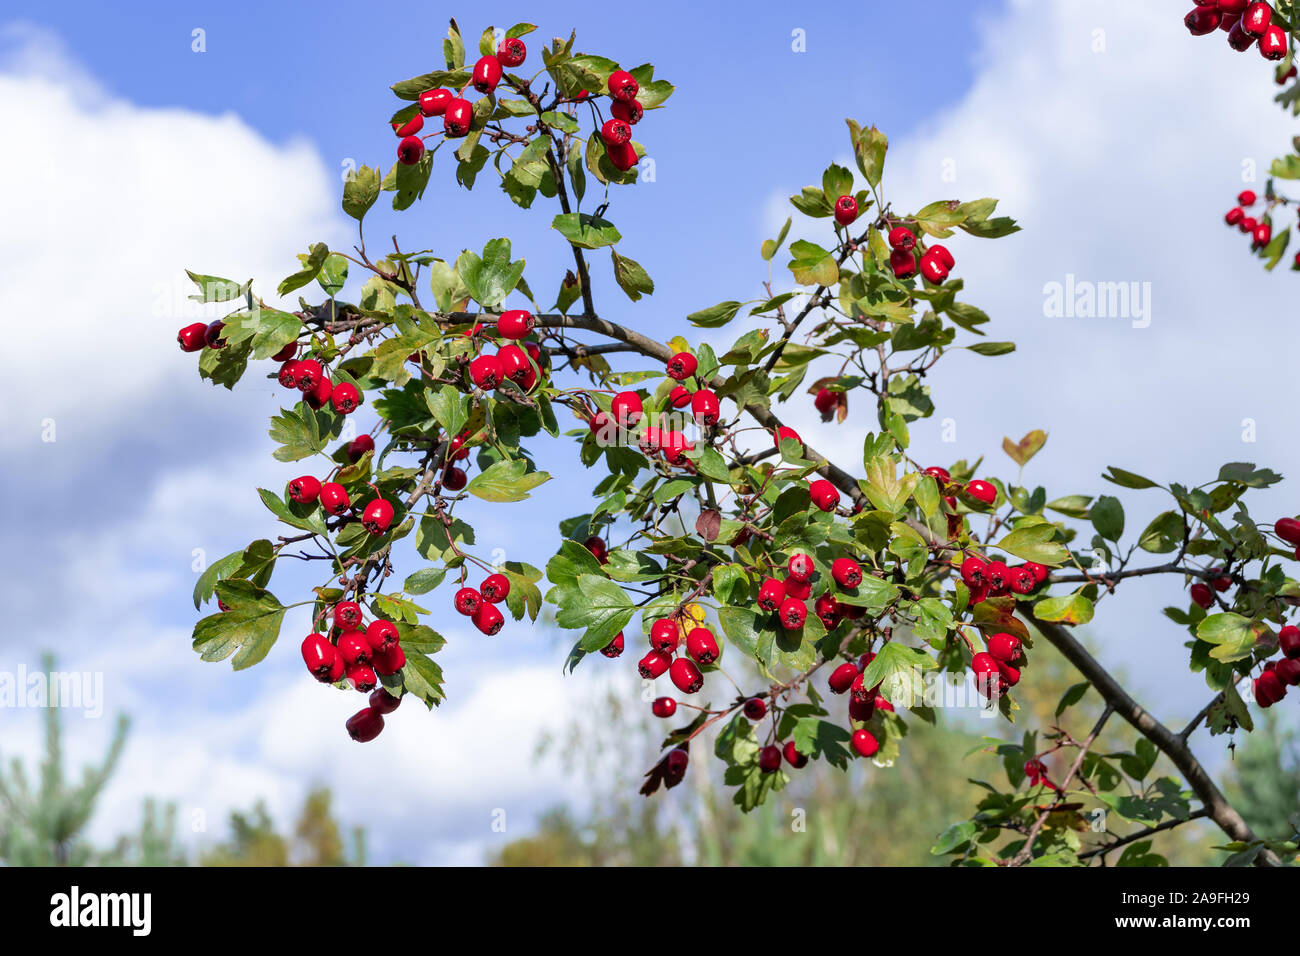 Bunch of Red Ripe Hawthorn Berries Against a Sky Stock Photo